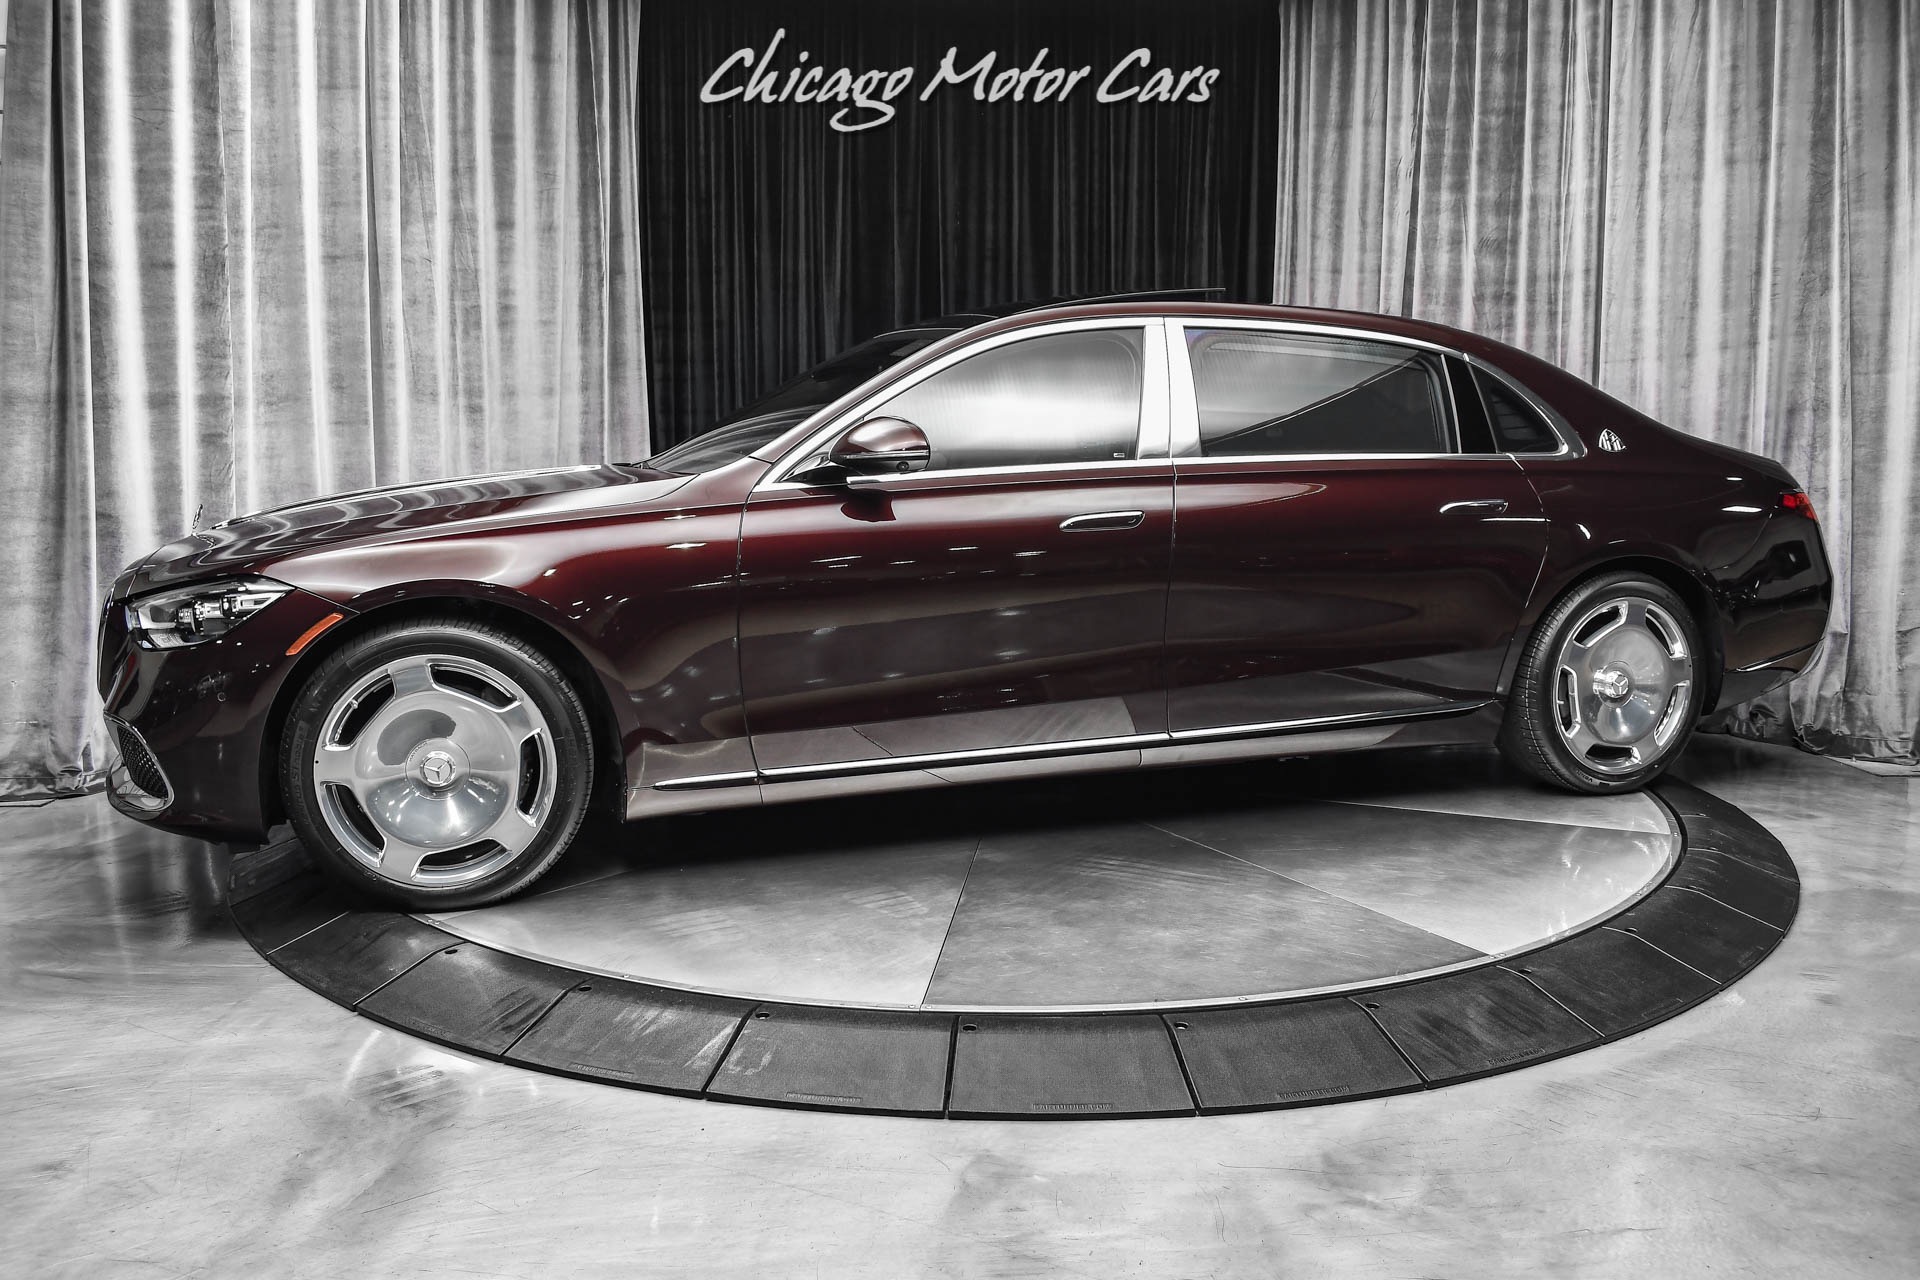 Used 2022 Mercedes-Benz S580 Maybach 4Matic Sedan ONLY 500 Miles! Flowing  Lines Trim! Gorgeous Color Combo! For Sale ($219,800) | Chicago Motor Cars  Stock #19459